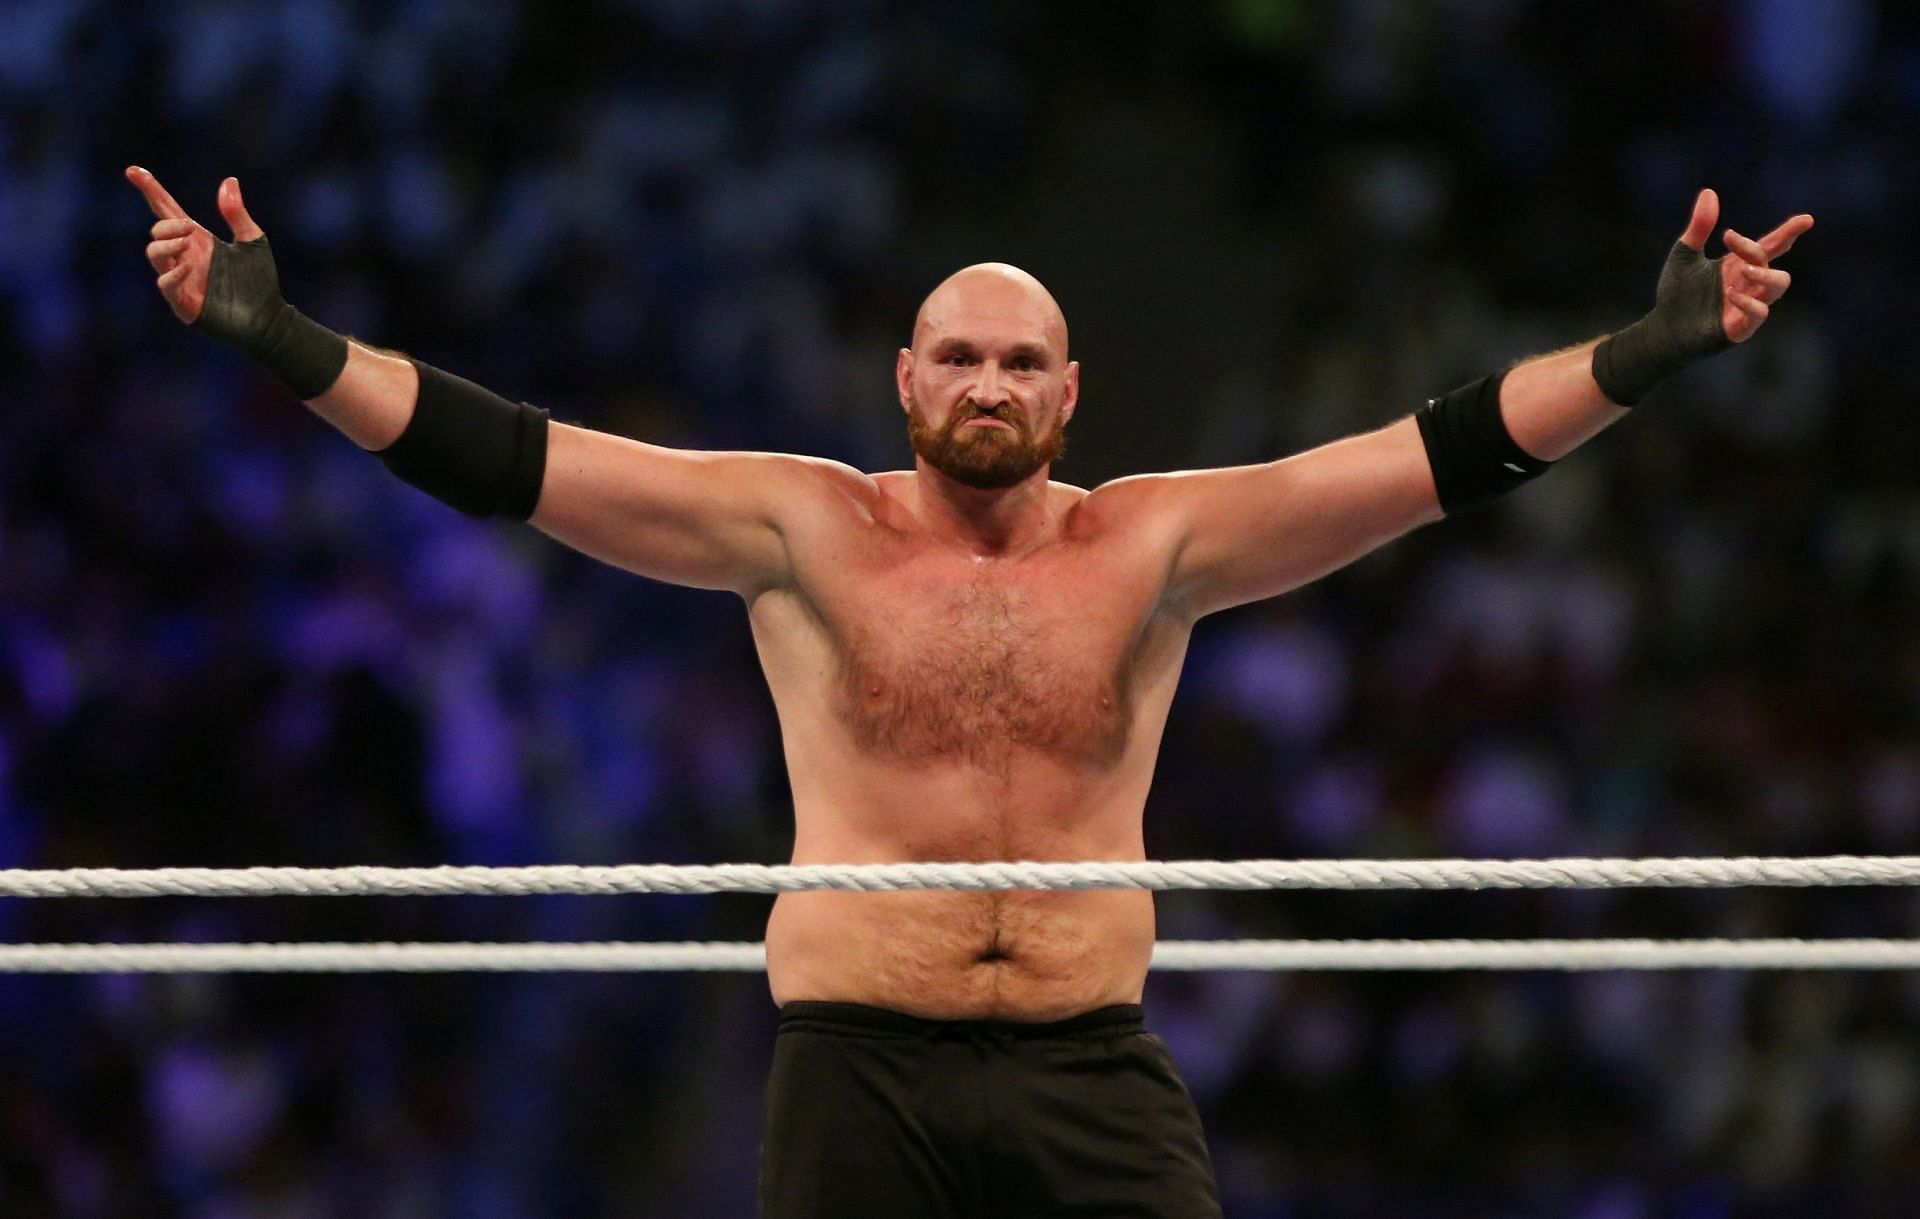 Tyson Fury will soon make his appearance in WWE again